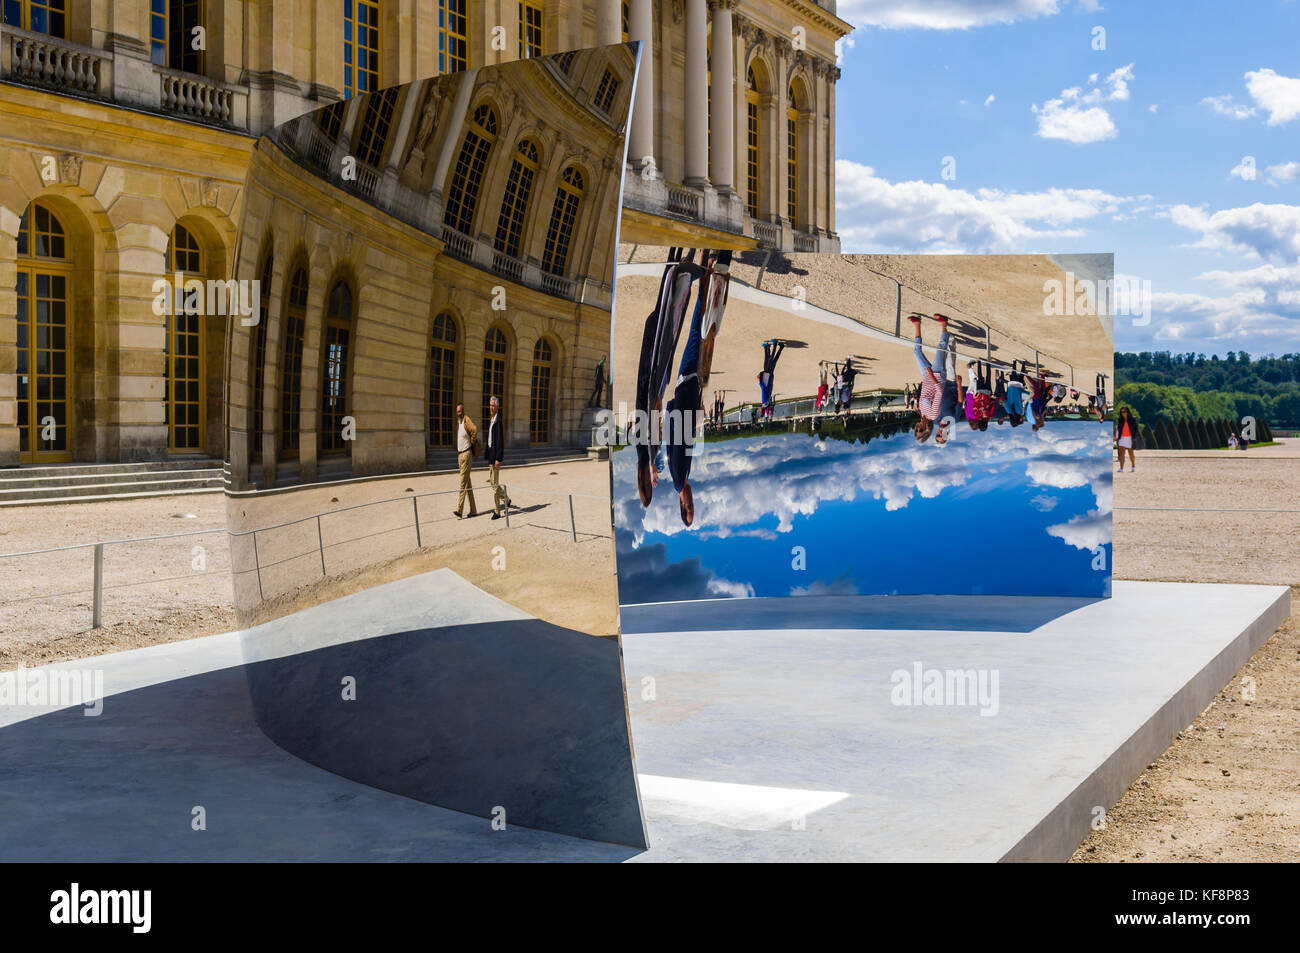 Art installation in the gardens of Chateau de Versailles in 2015.  The artwork, called 'C-Curve' by British contemporary artist, Anish Kapoor, is pictured in front of the Chateau, against a blue cloudy sky, reflecting the sky, with visitors reflected. Stock Photo